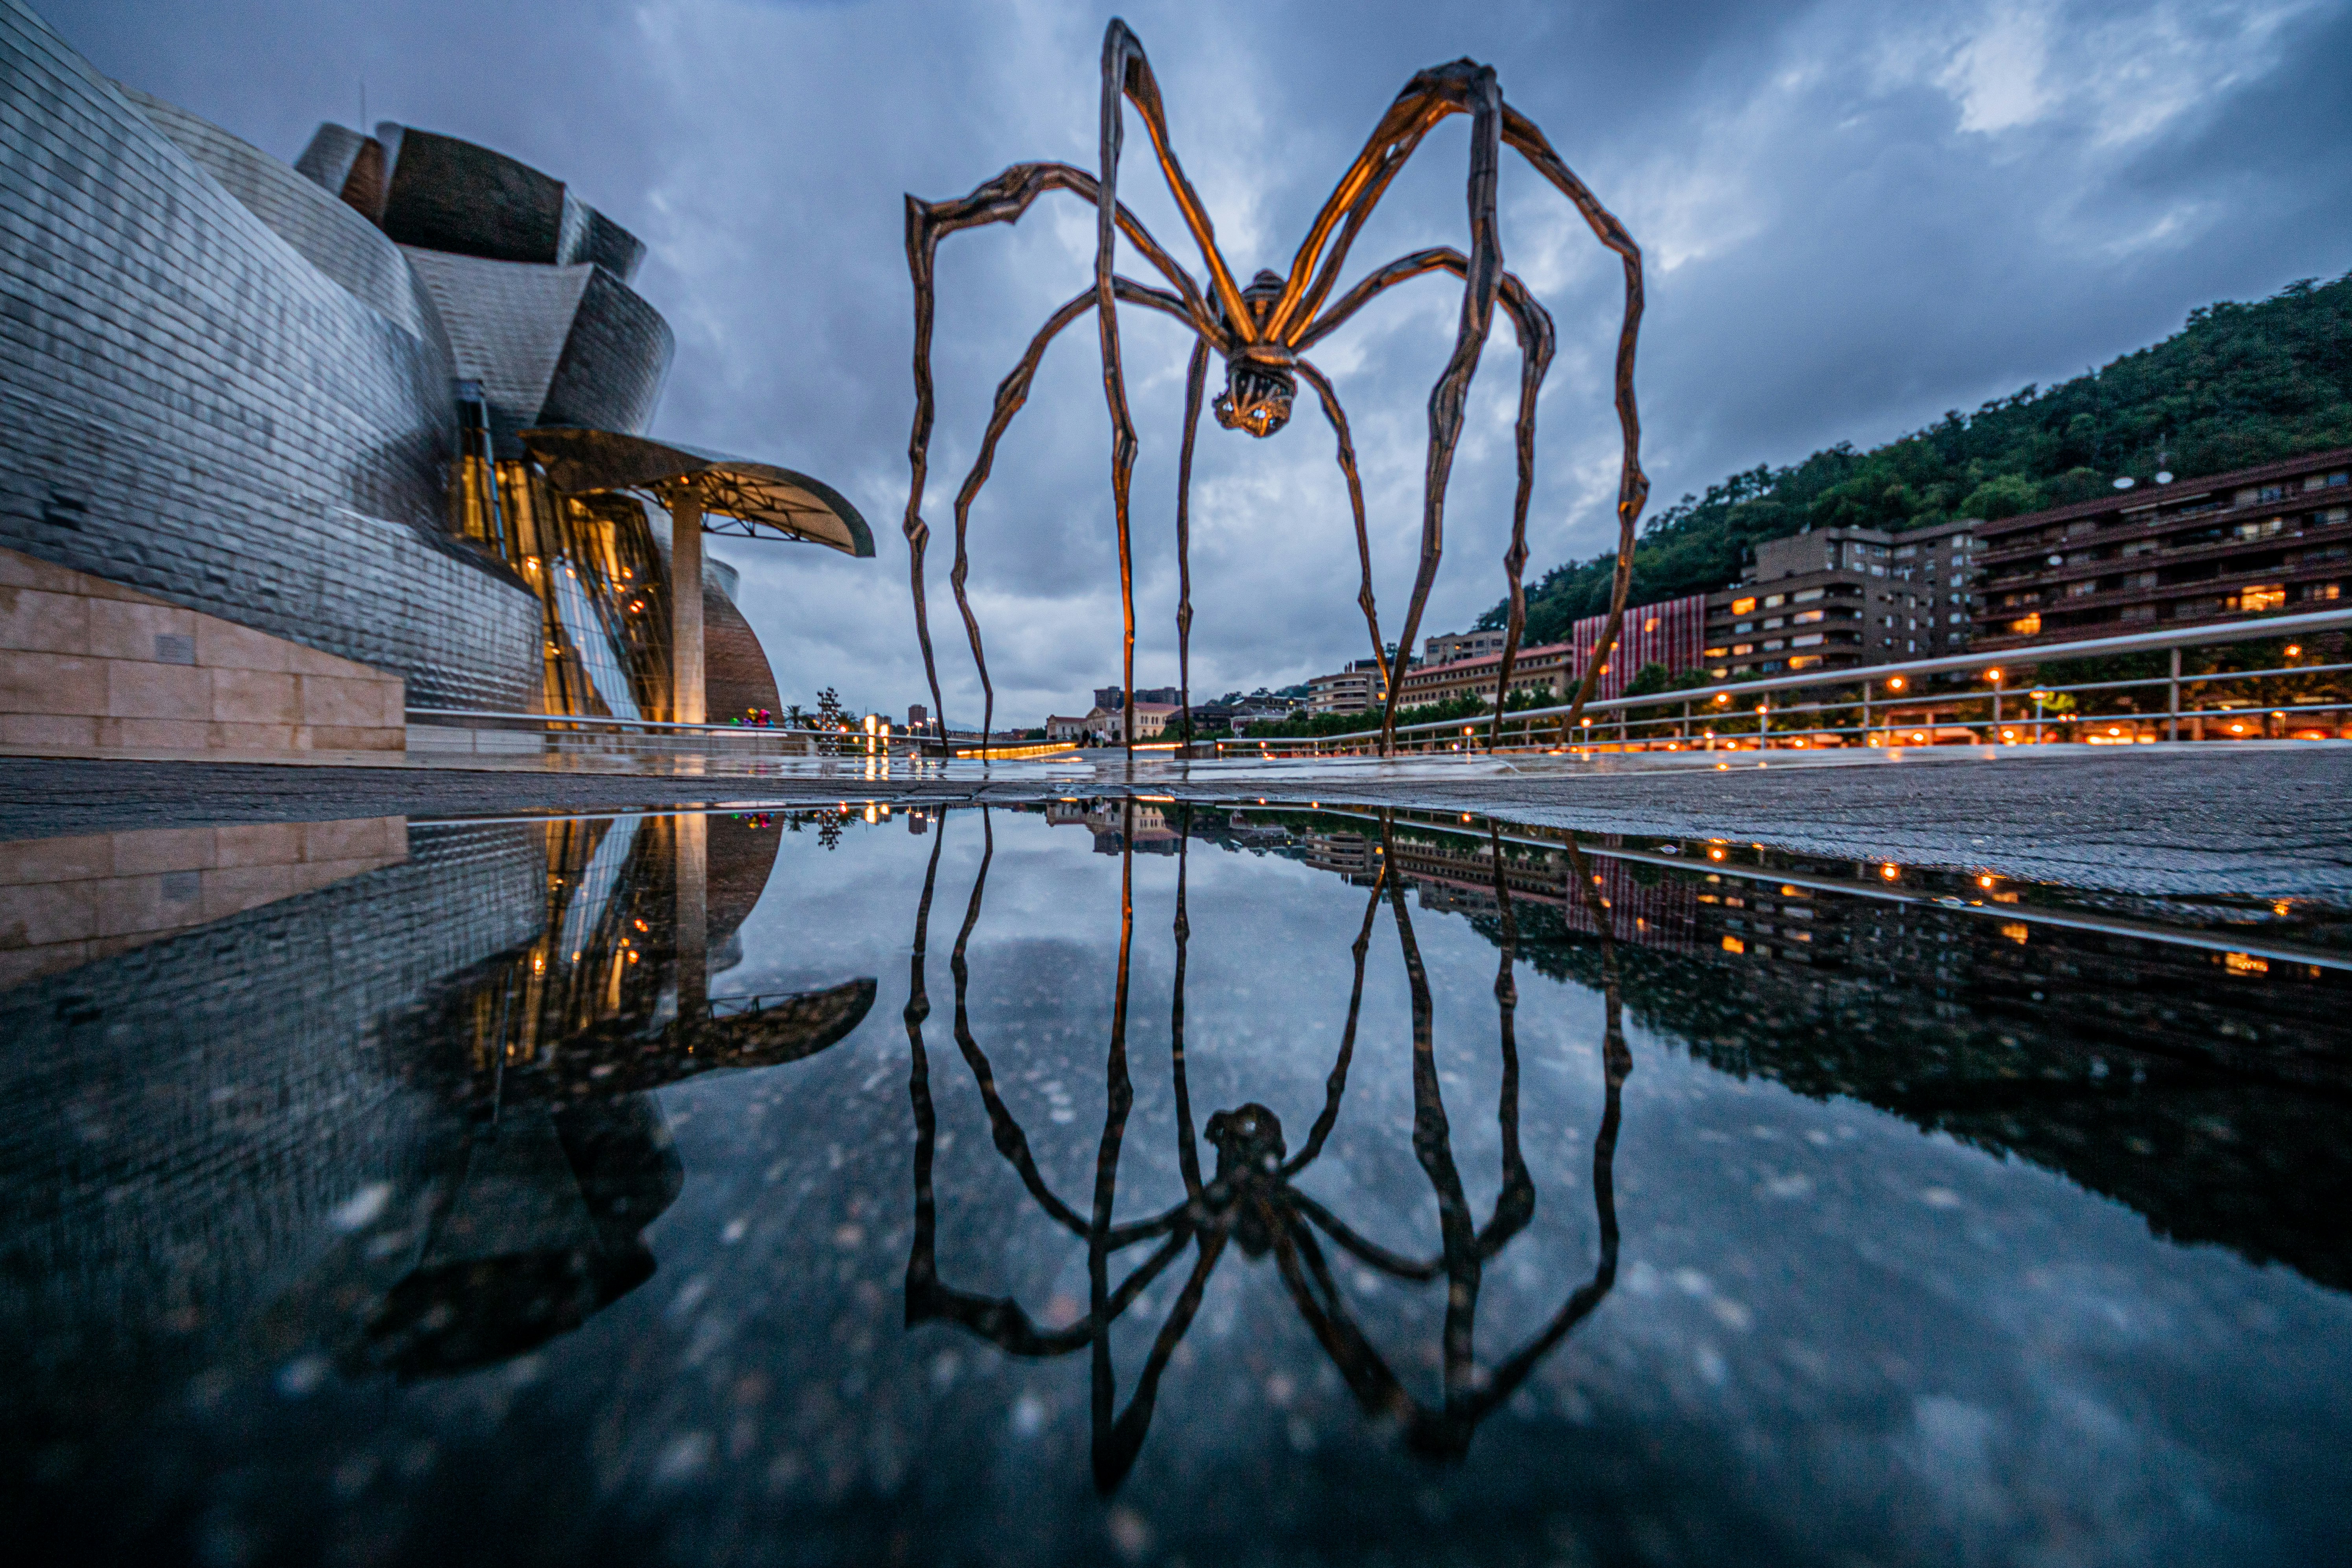 The 30-foot-tall Maman spider sculpture crawls along the river’s edge just outside the Guggenheim.